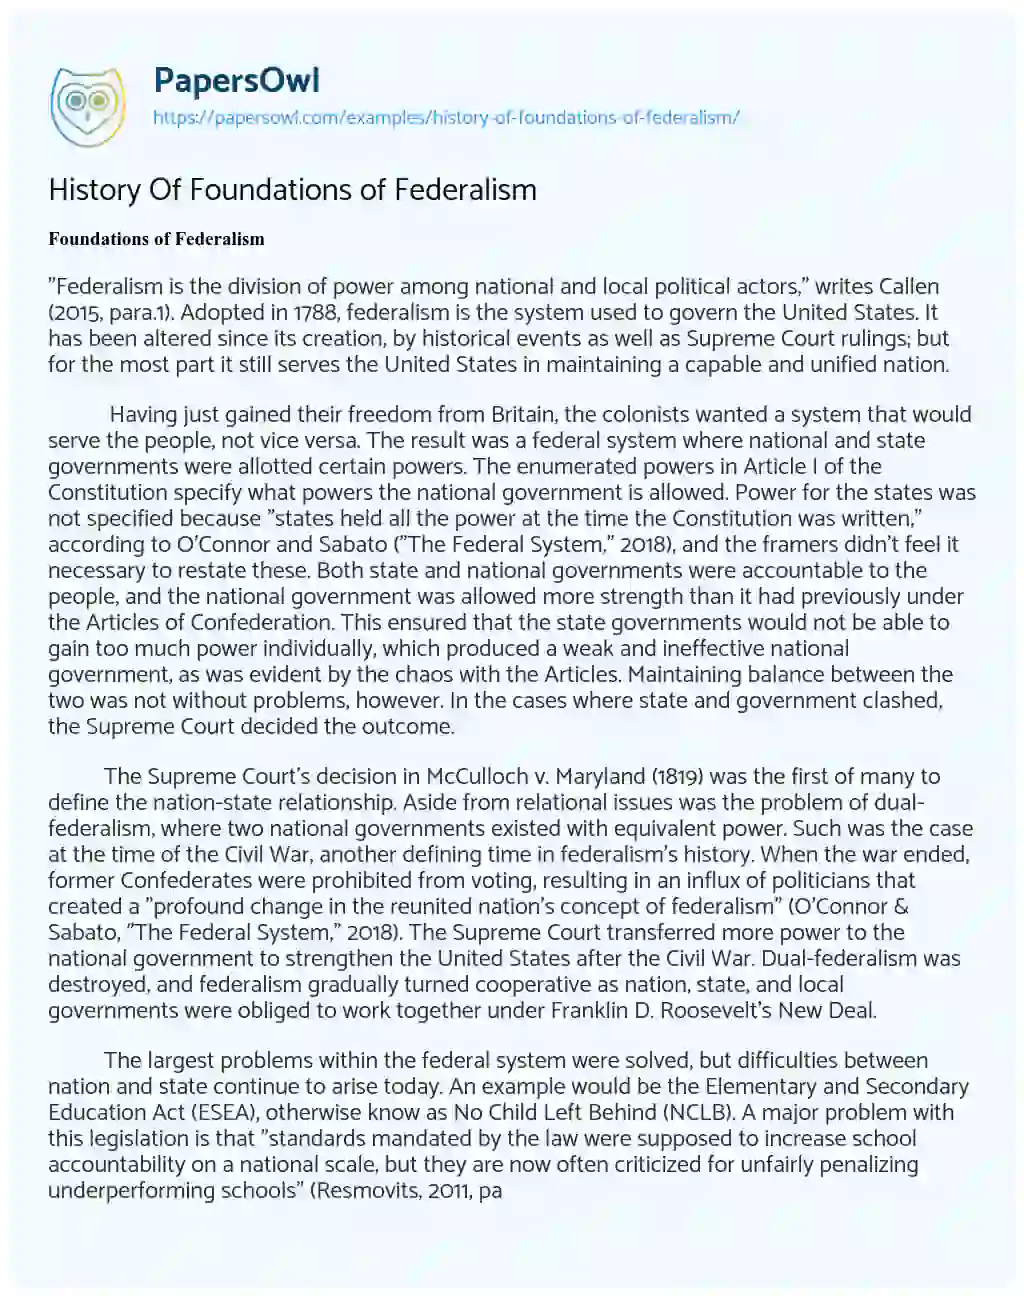 Essay on History of Foundations of Federalism